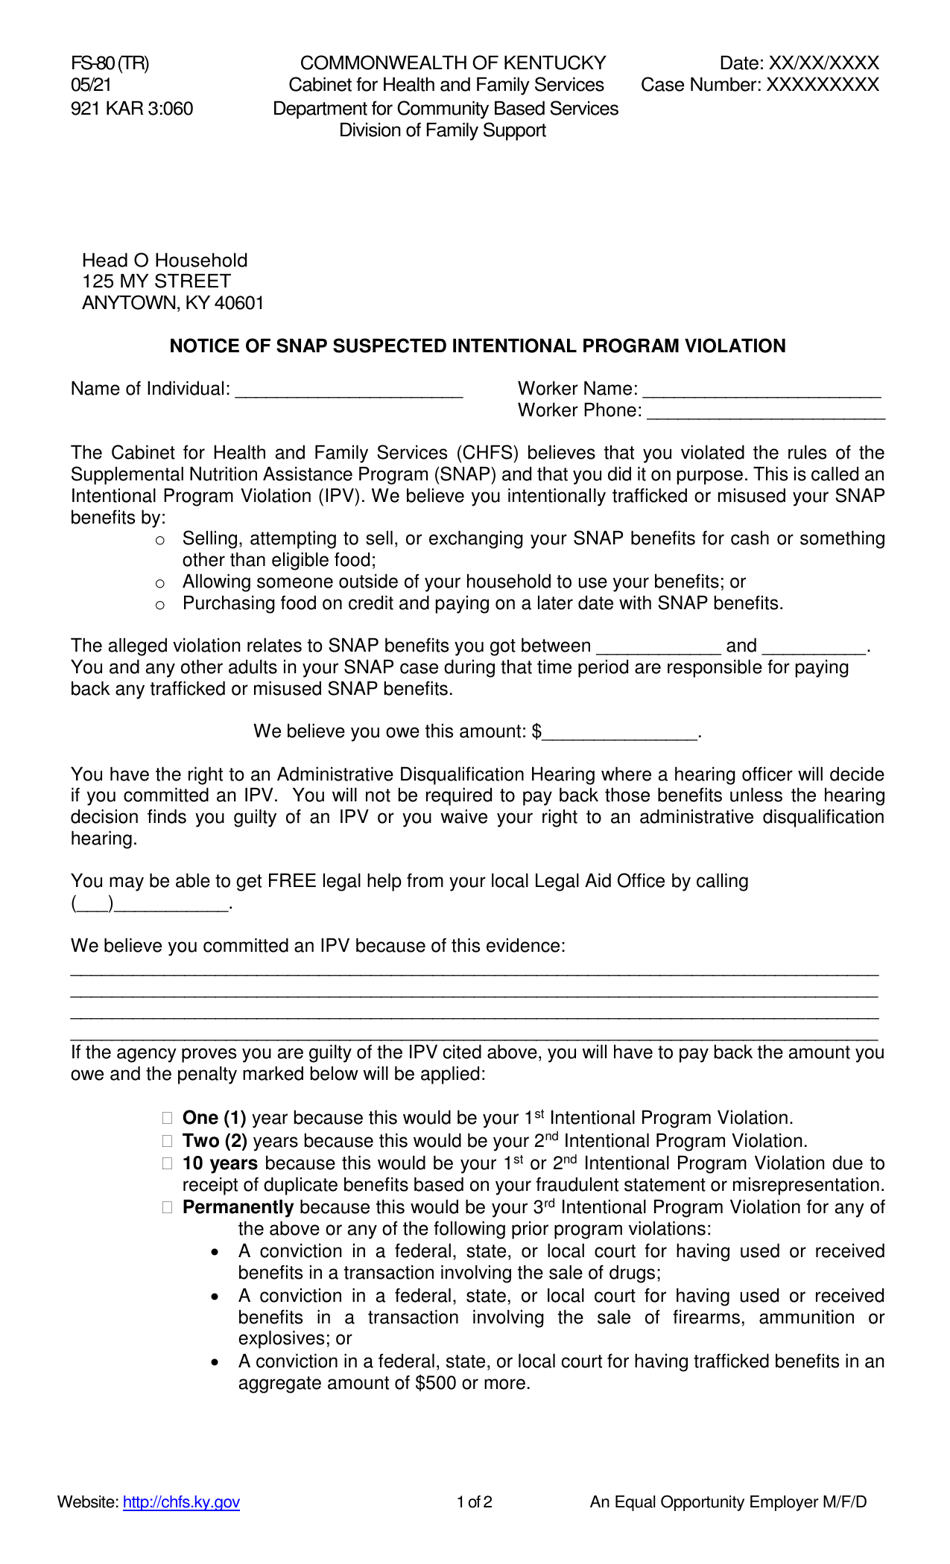 Form FS-80(TR) Notice of Snap Suspected Intentional Program Violation - Kentucky, Page 1